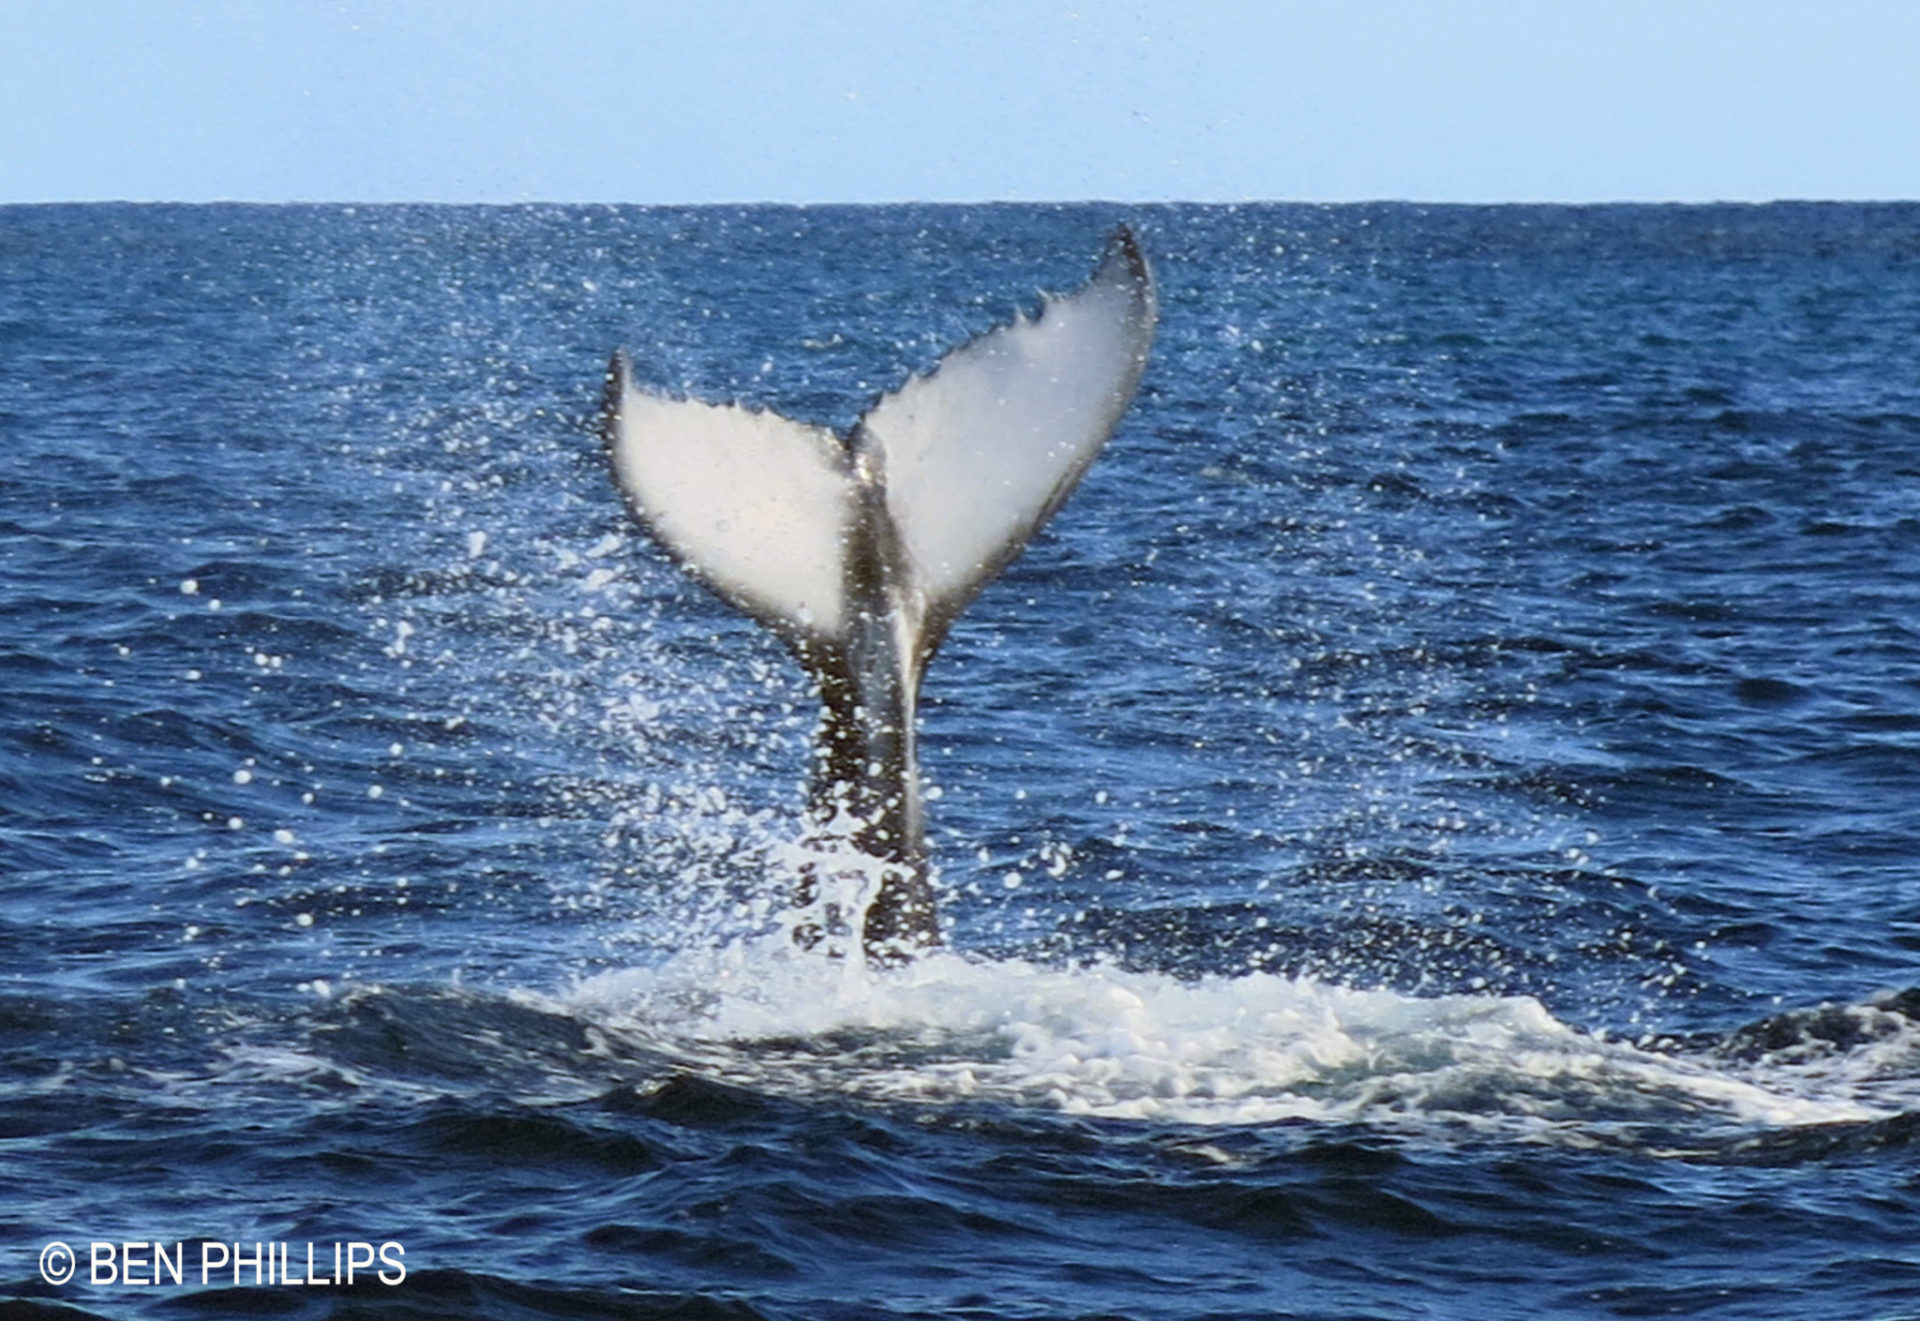 A humpback whale slapping its tail flukes.